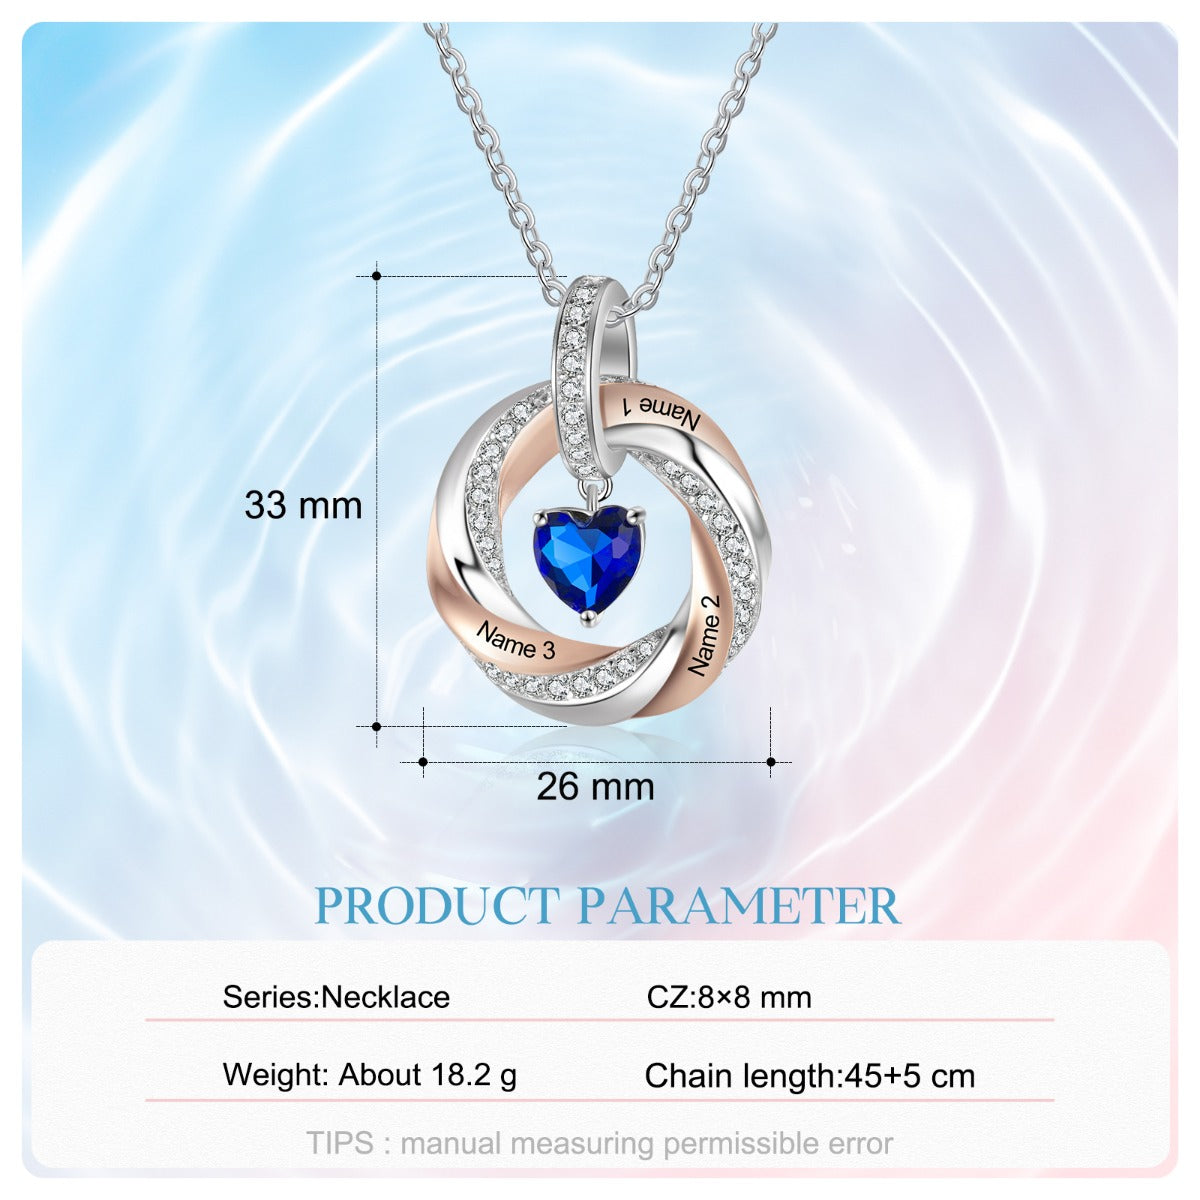 Heart of Motion Birthstone Necklace